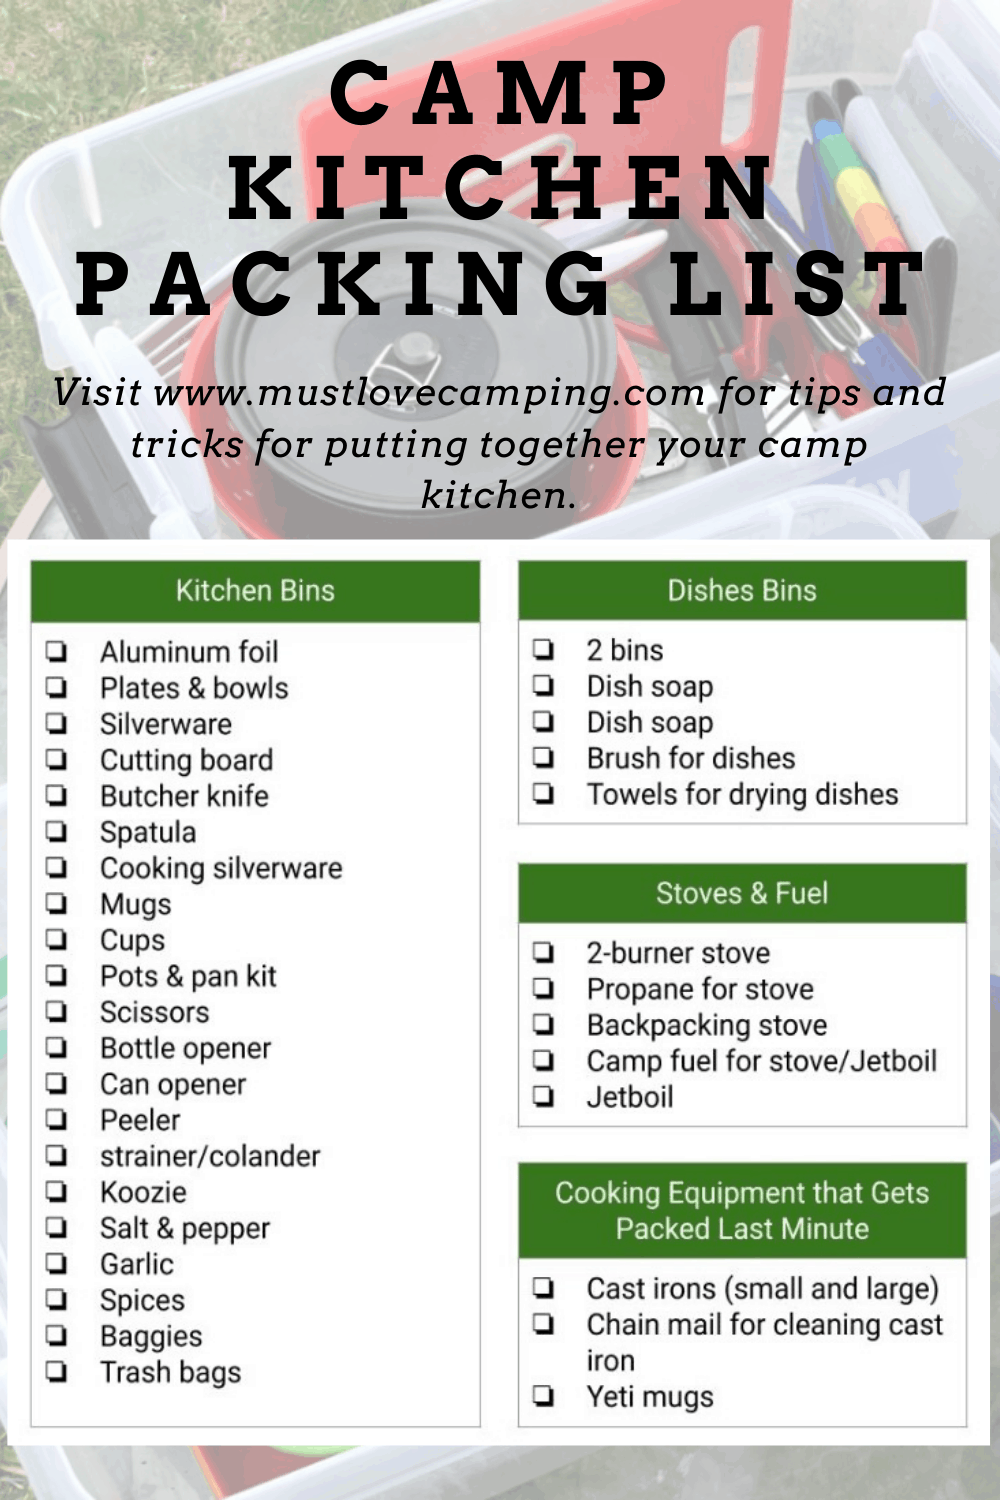 https://www.mustlovecamping.com/wp-content/uploads/2020/06/camp-kitchen-packing-list-list.png